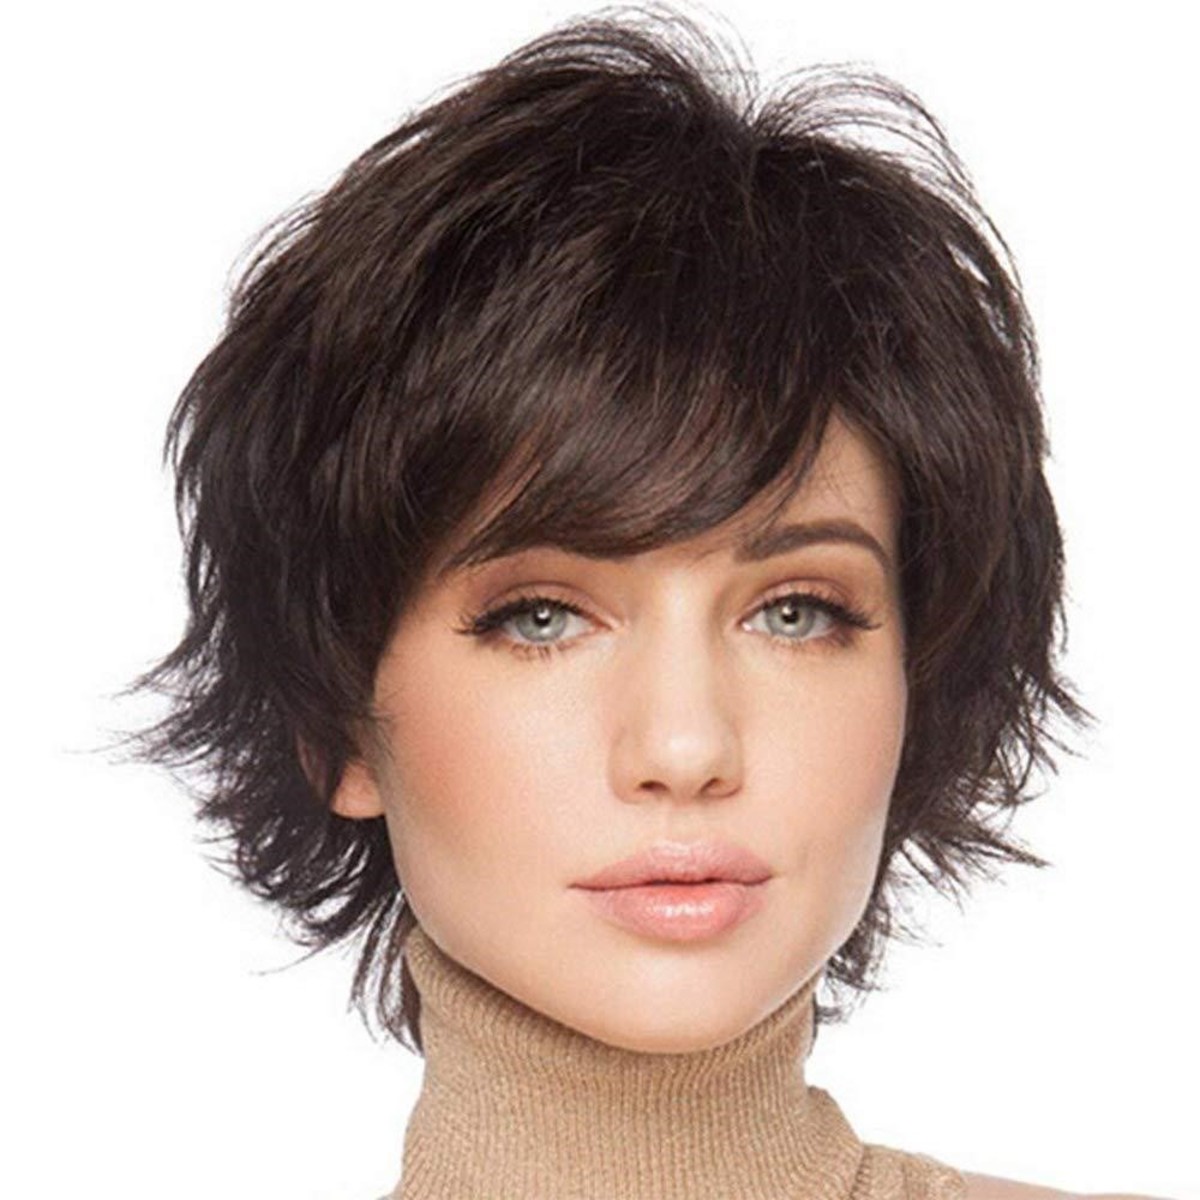 How to Wear Hair Toppers for Thinning Hair? - HubPages